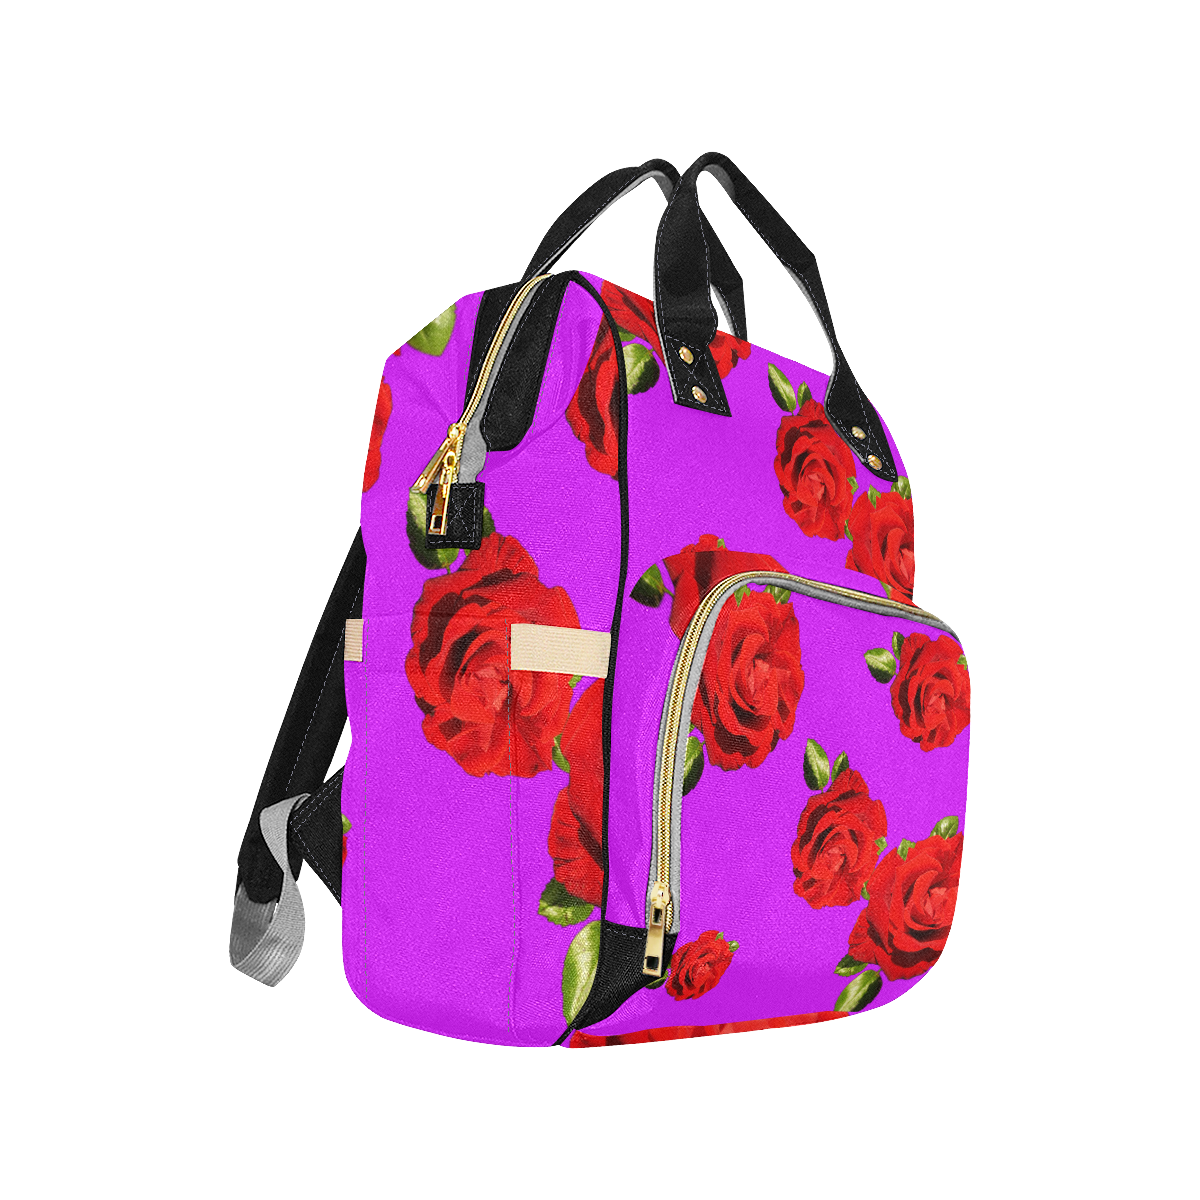 Fairlings Delight's Floral Luxury Collection- Red Rose Multi-Function Diaper Backpack 53086c13 Multi-Function Diaper Backpack/Diaper Bag (Model 1688)